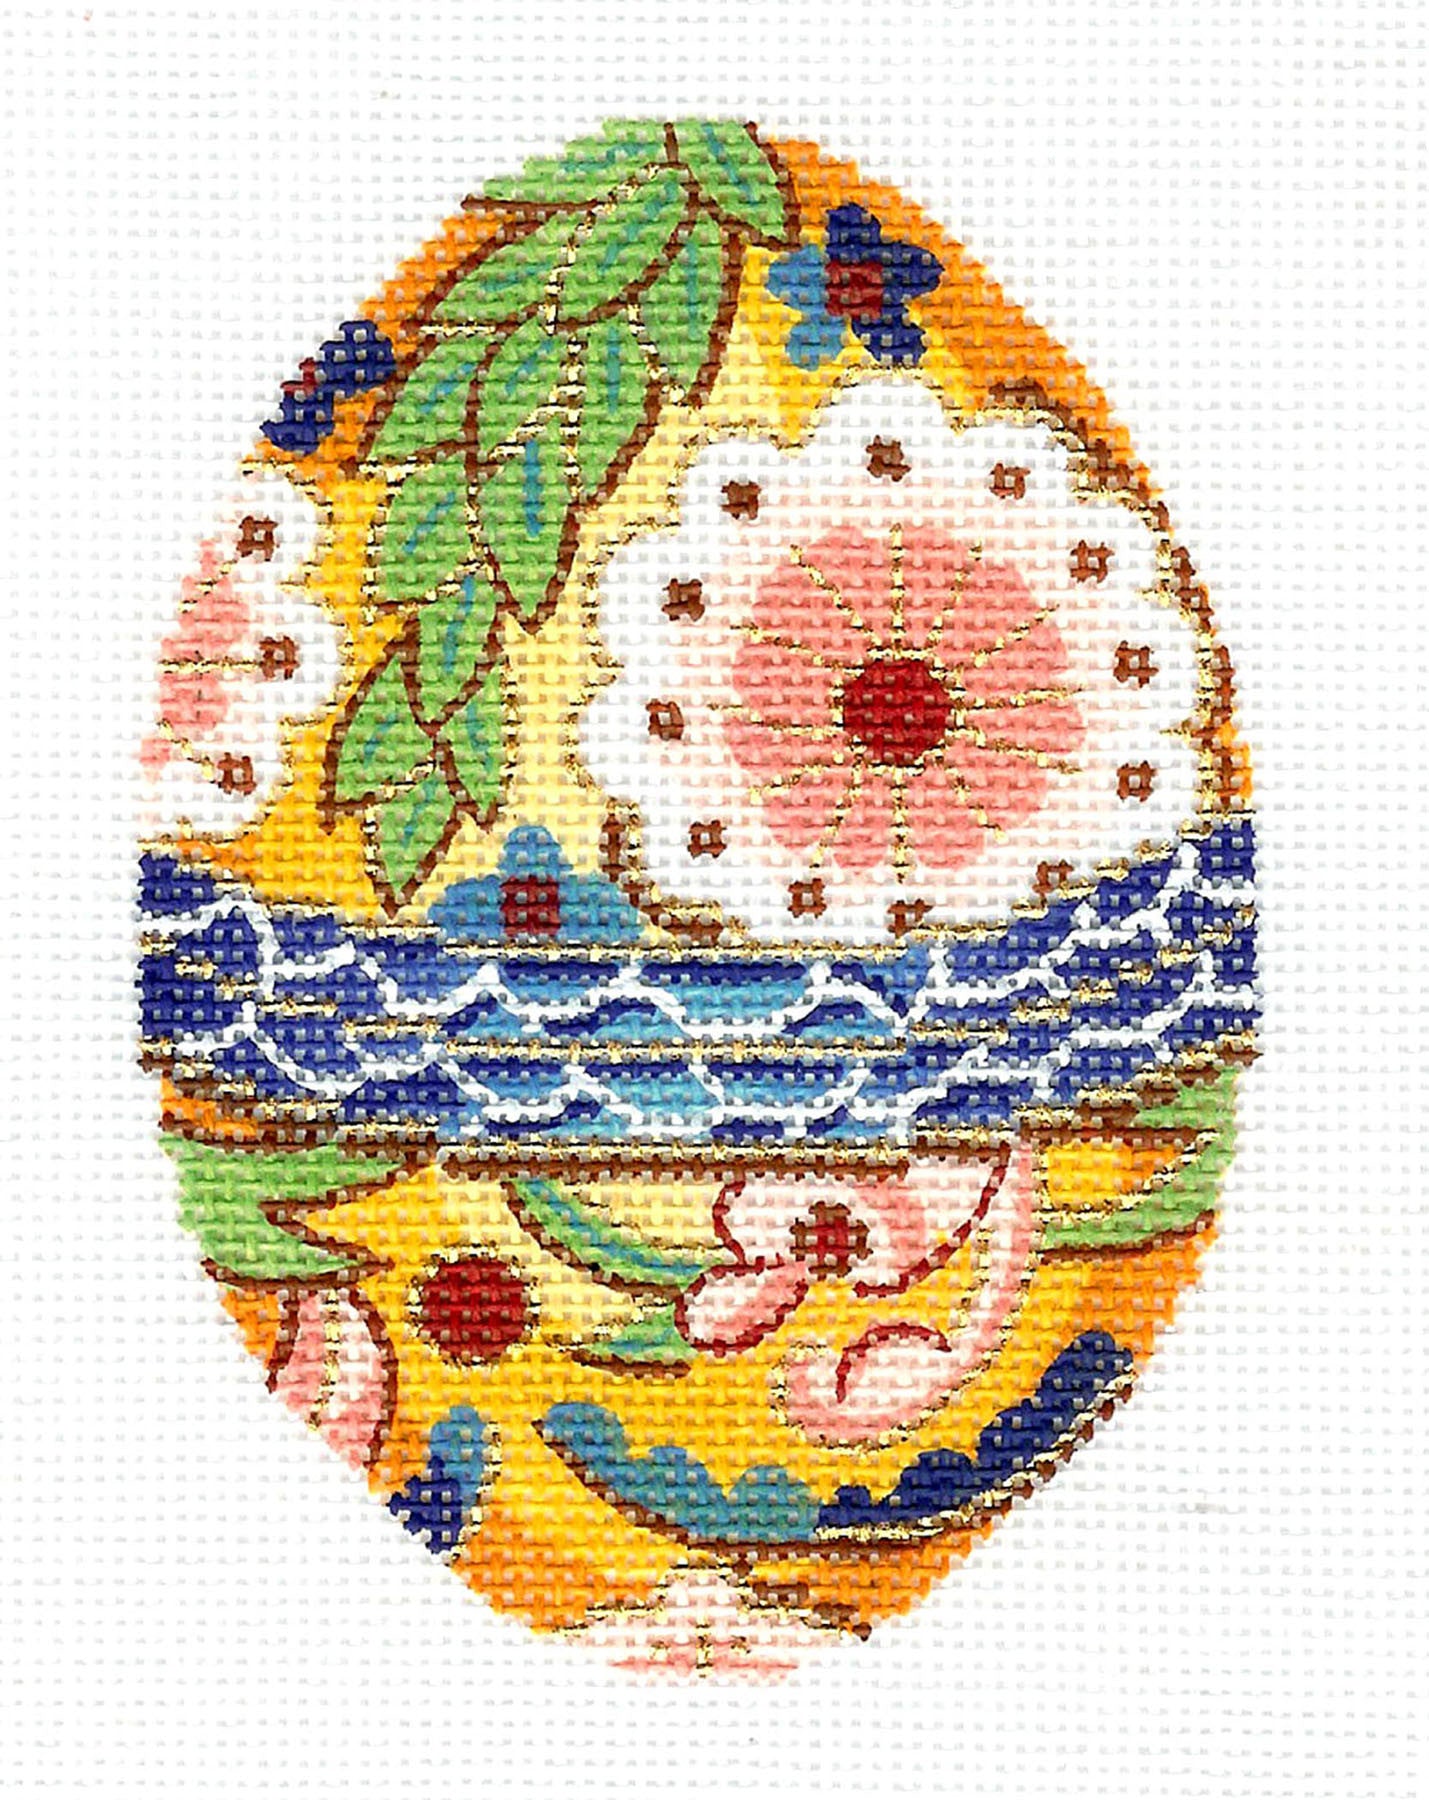 Faberge Egg ~ Elegant Jeweled Egg Floral handpainted Needlepoint Canvas or Ornament by LEE